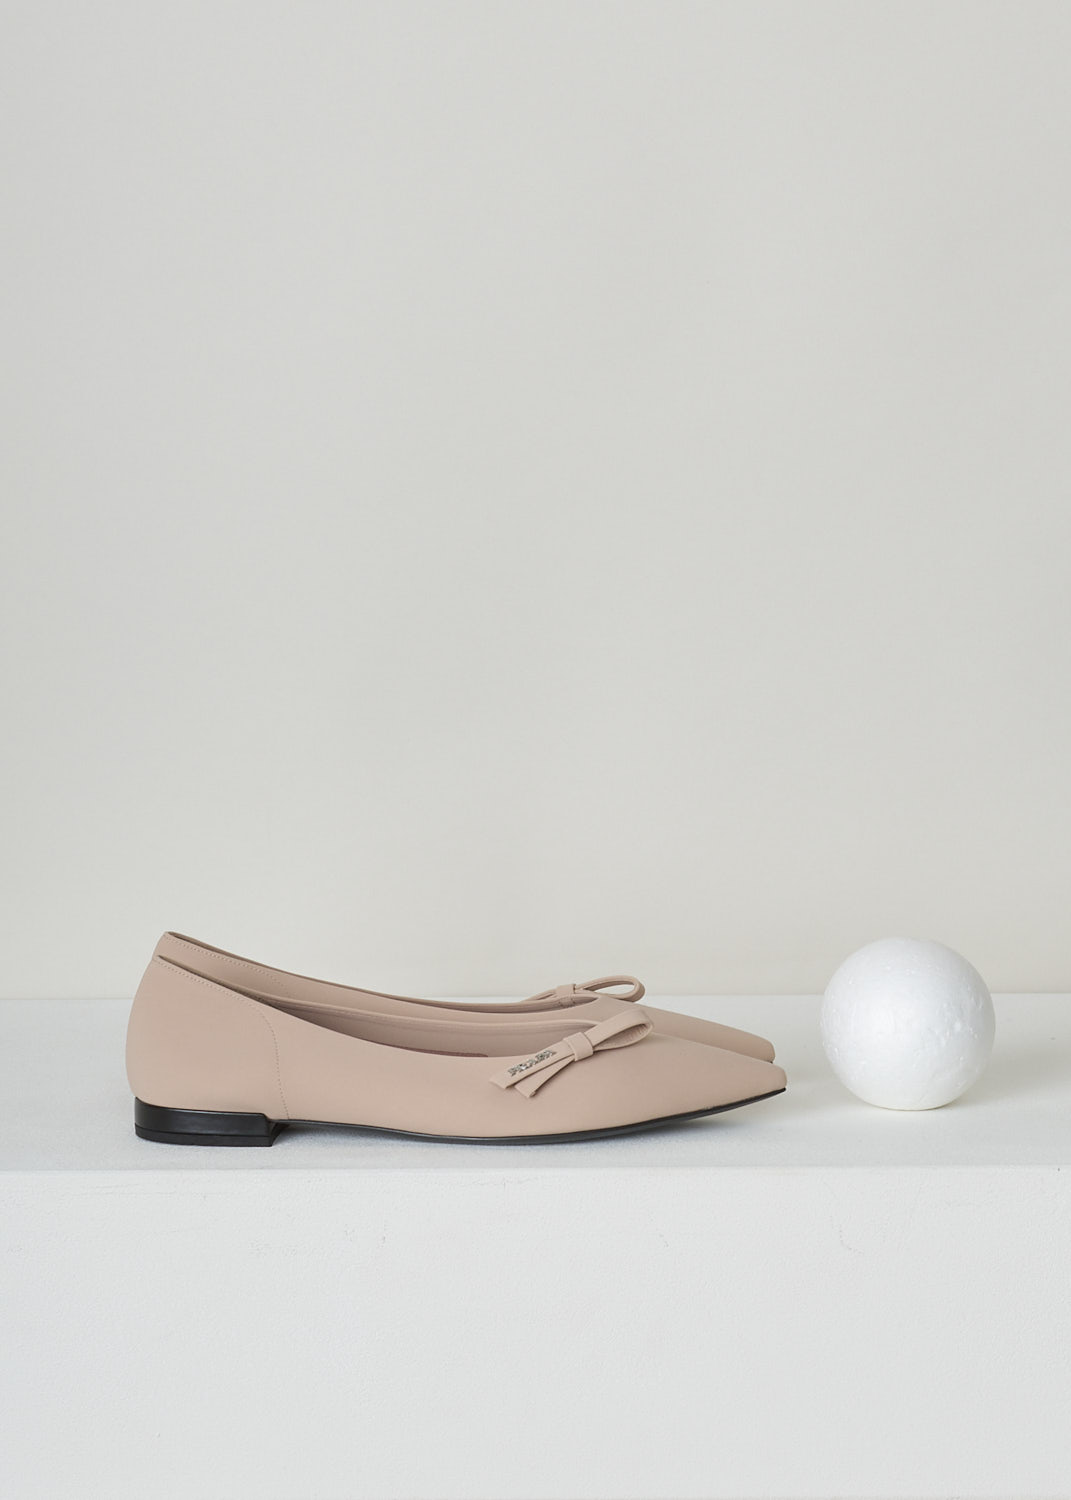 PRADA, NUDE BALLET FLATS WITH POINTED TOE, TESSUTO_TECH_1F273L_3KQ6_F0A48_NUDO, Pink, Beige, Side, These nude colored ballet flats have a pointed toe with, along the topline, a bow with the brand's name in silver-toned letters. These slip-in flats have a small heel. 
